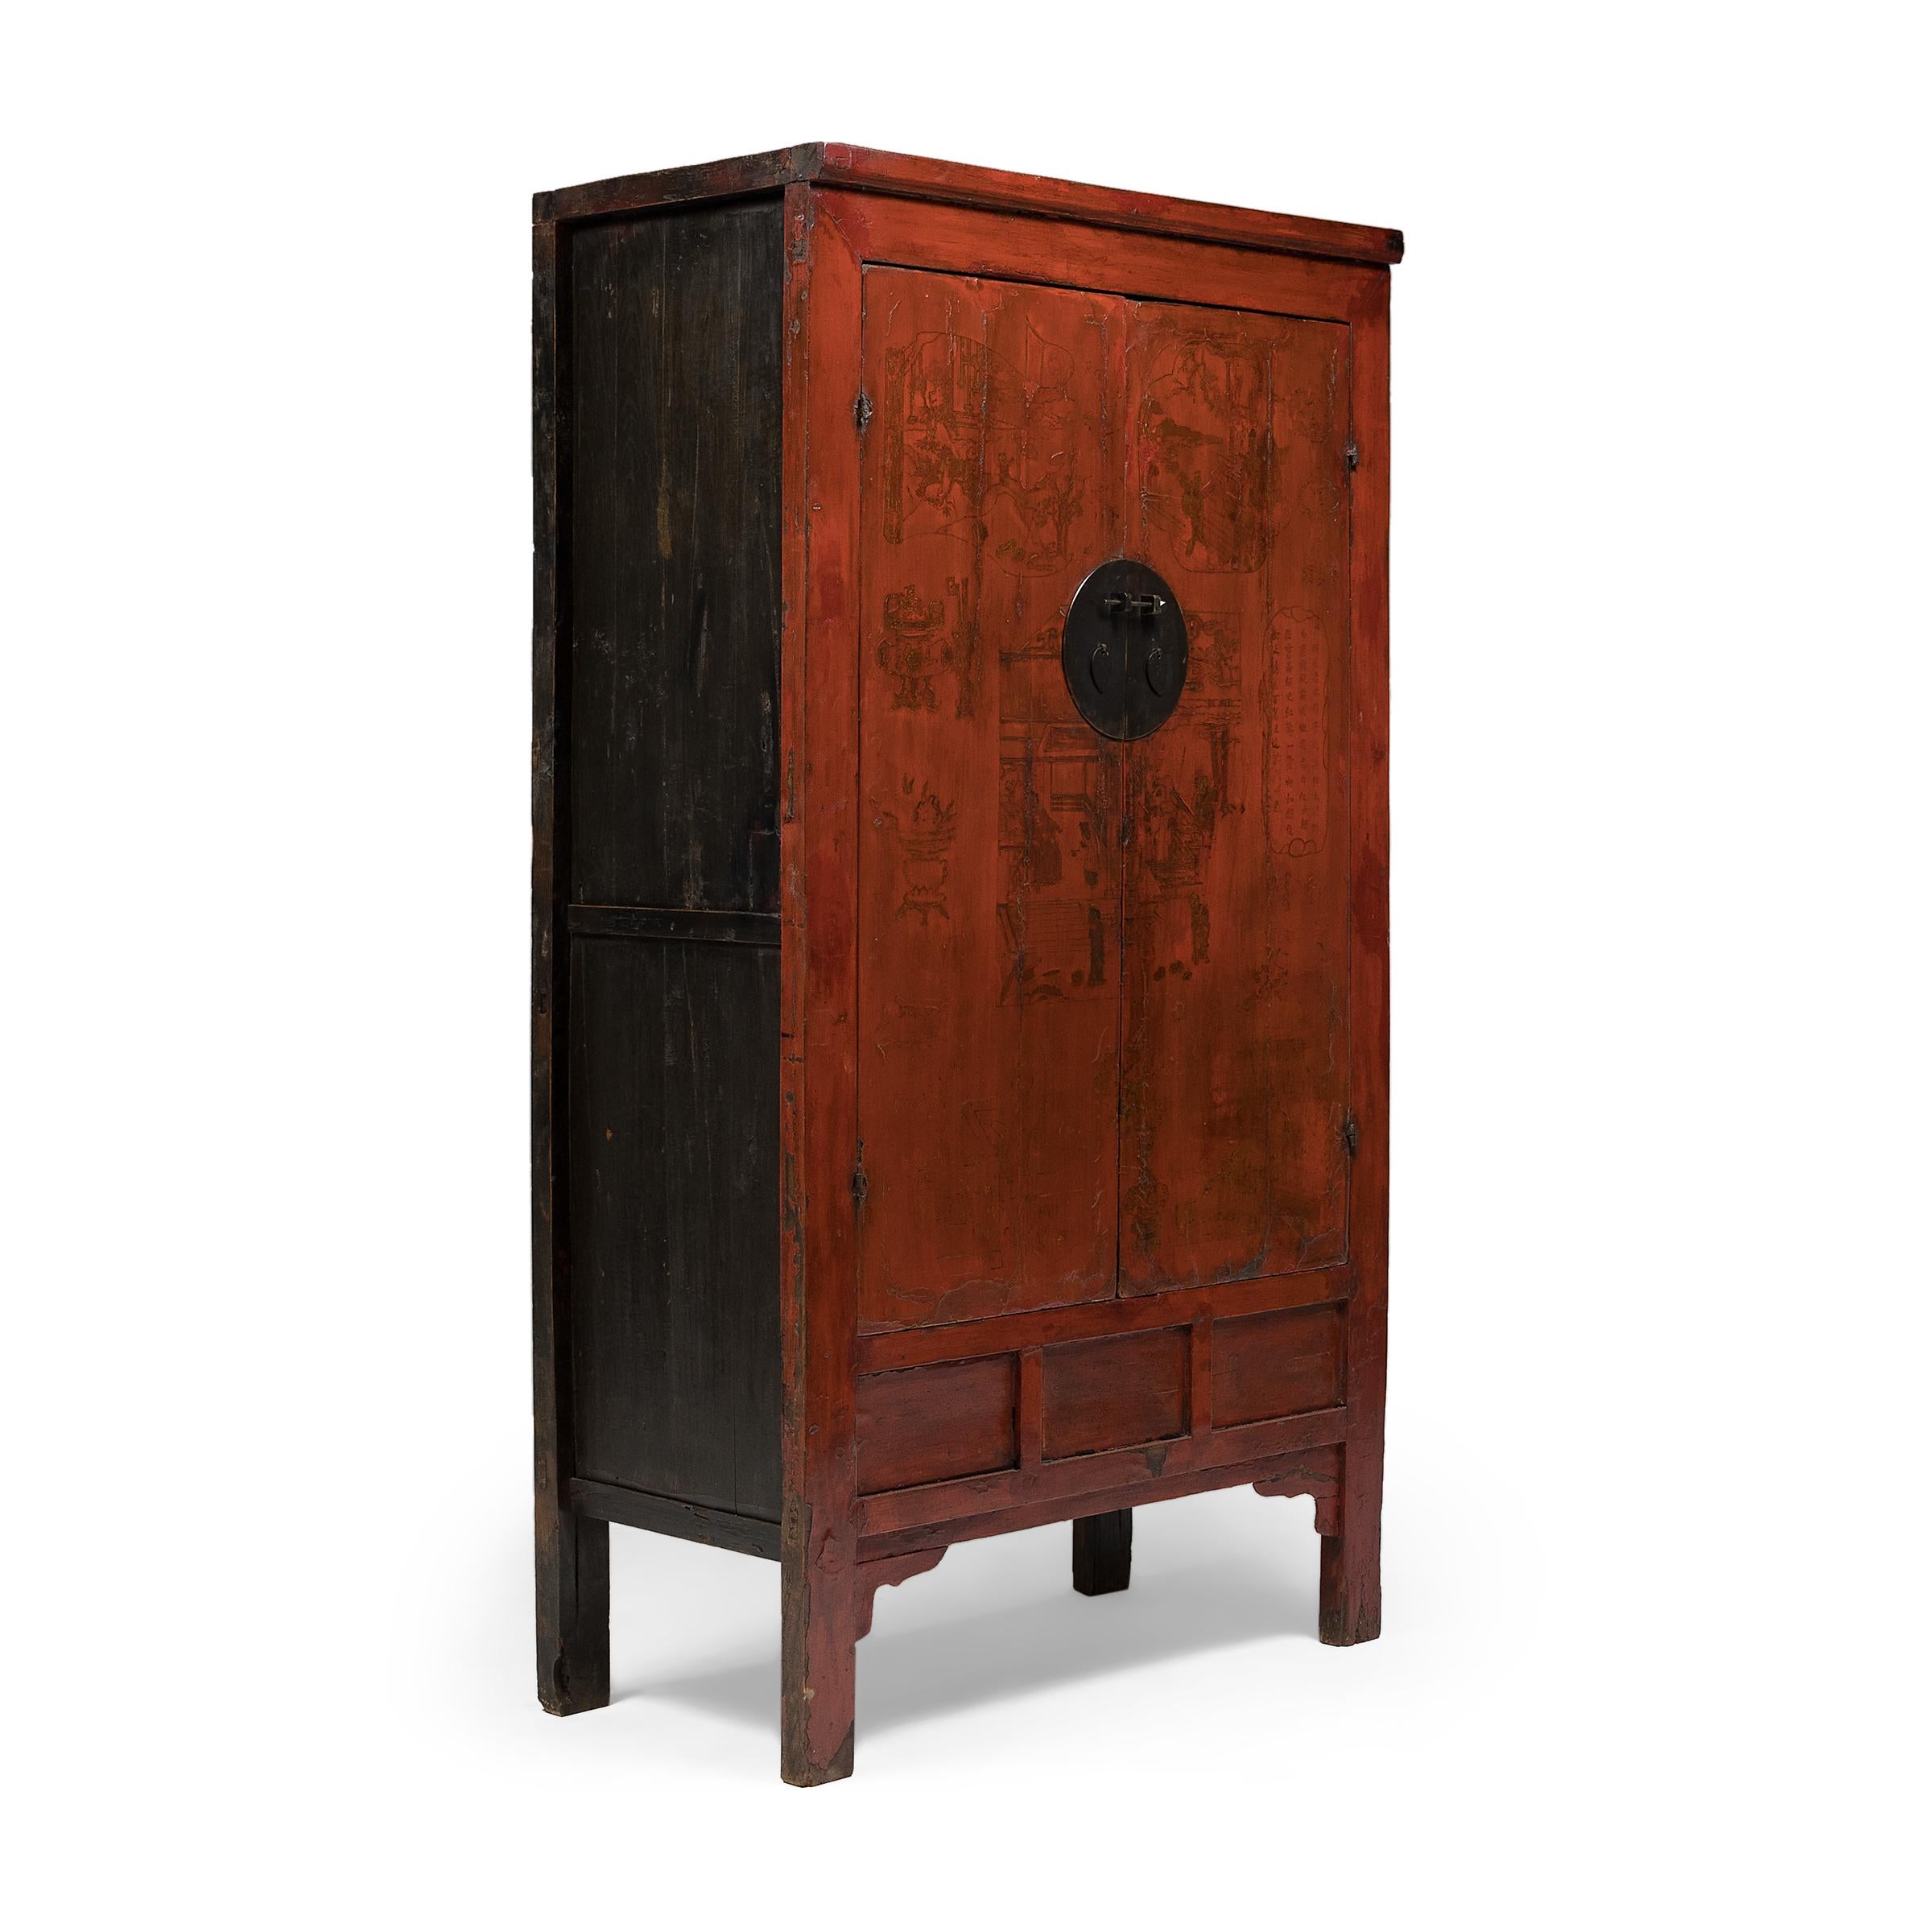 With its commanding scale and simple silhouette, this tall Qing-dynasty cabinet offered the perfect canvas for elaborate decoration. Crafted in the mid-19th century, the cabinet has a clean-lined form, designed with straight sides, square corners